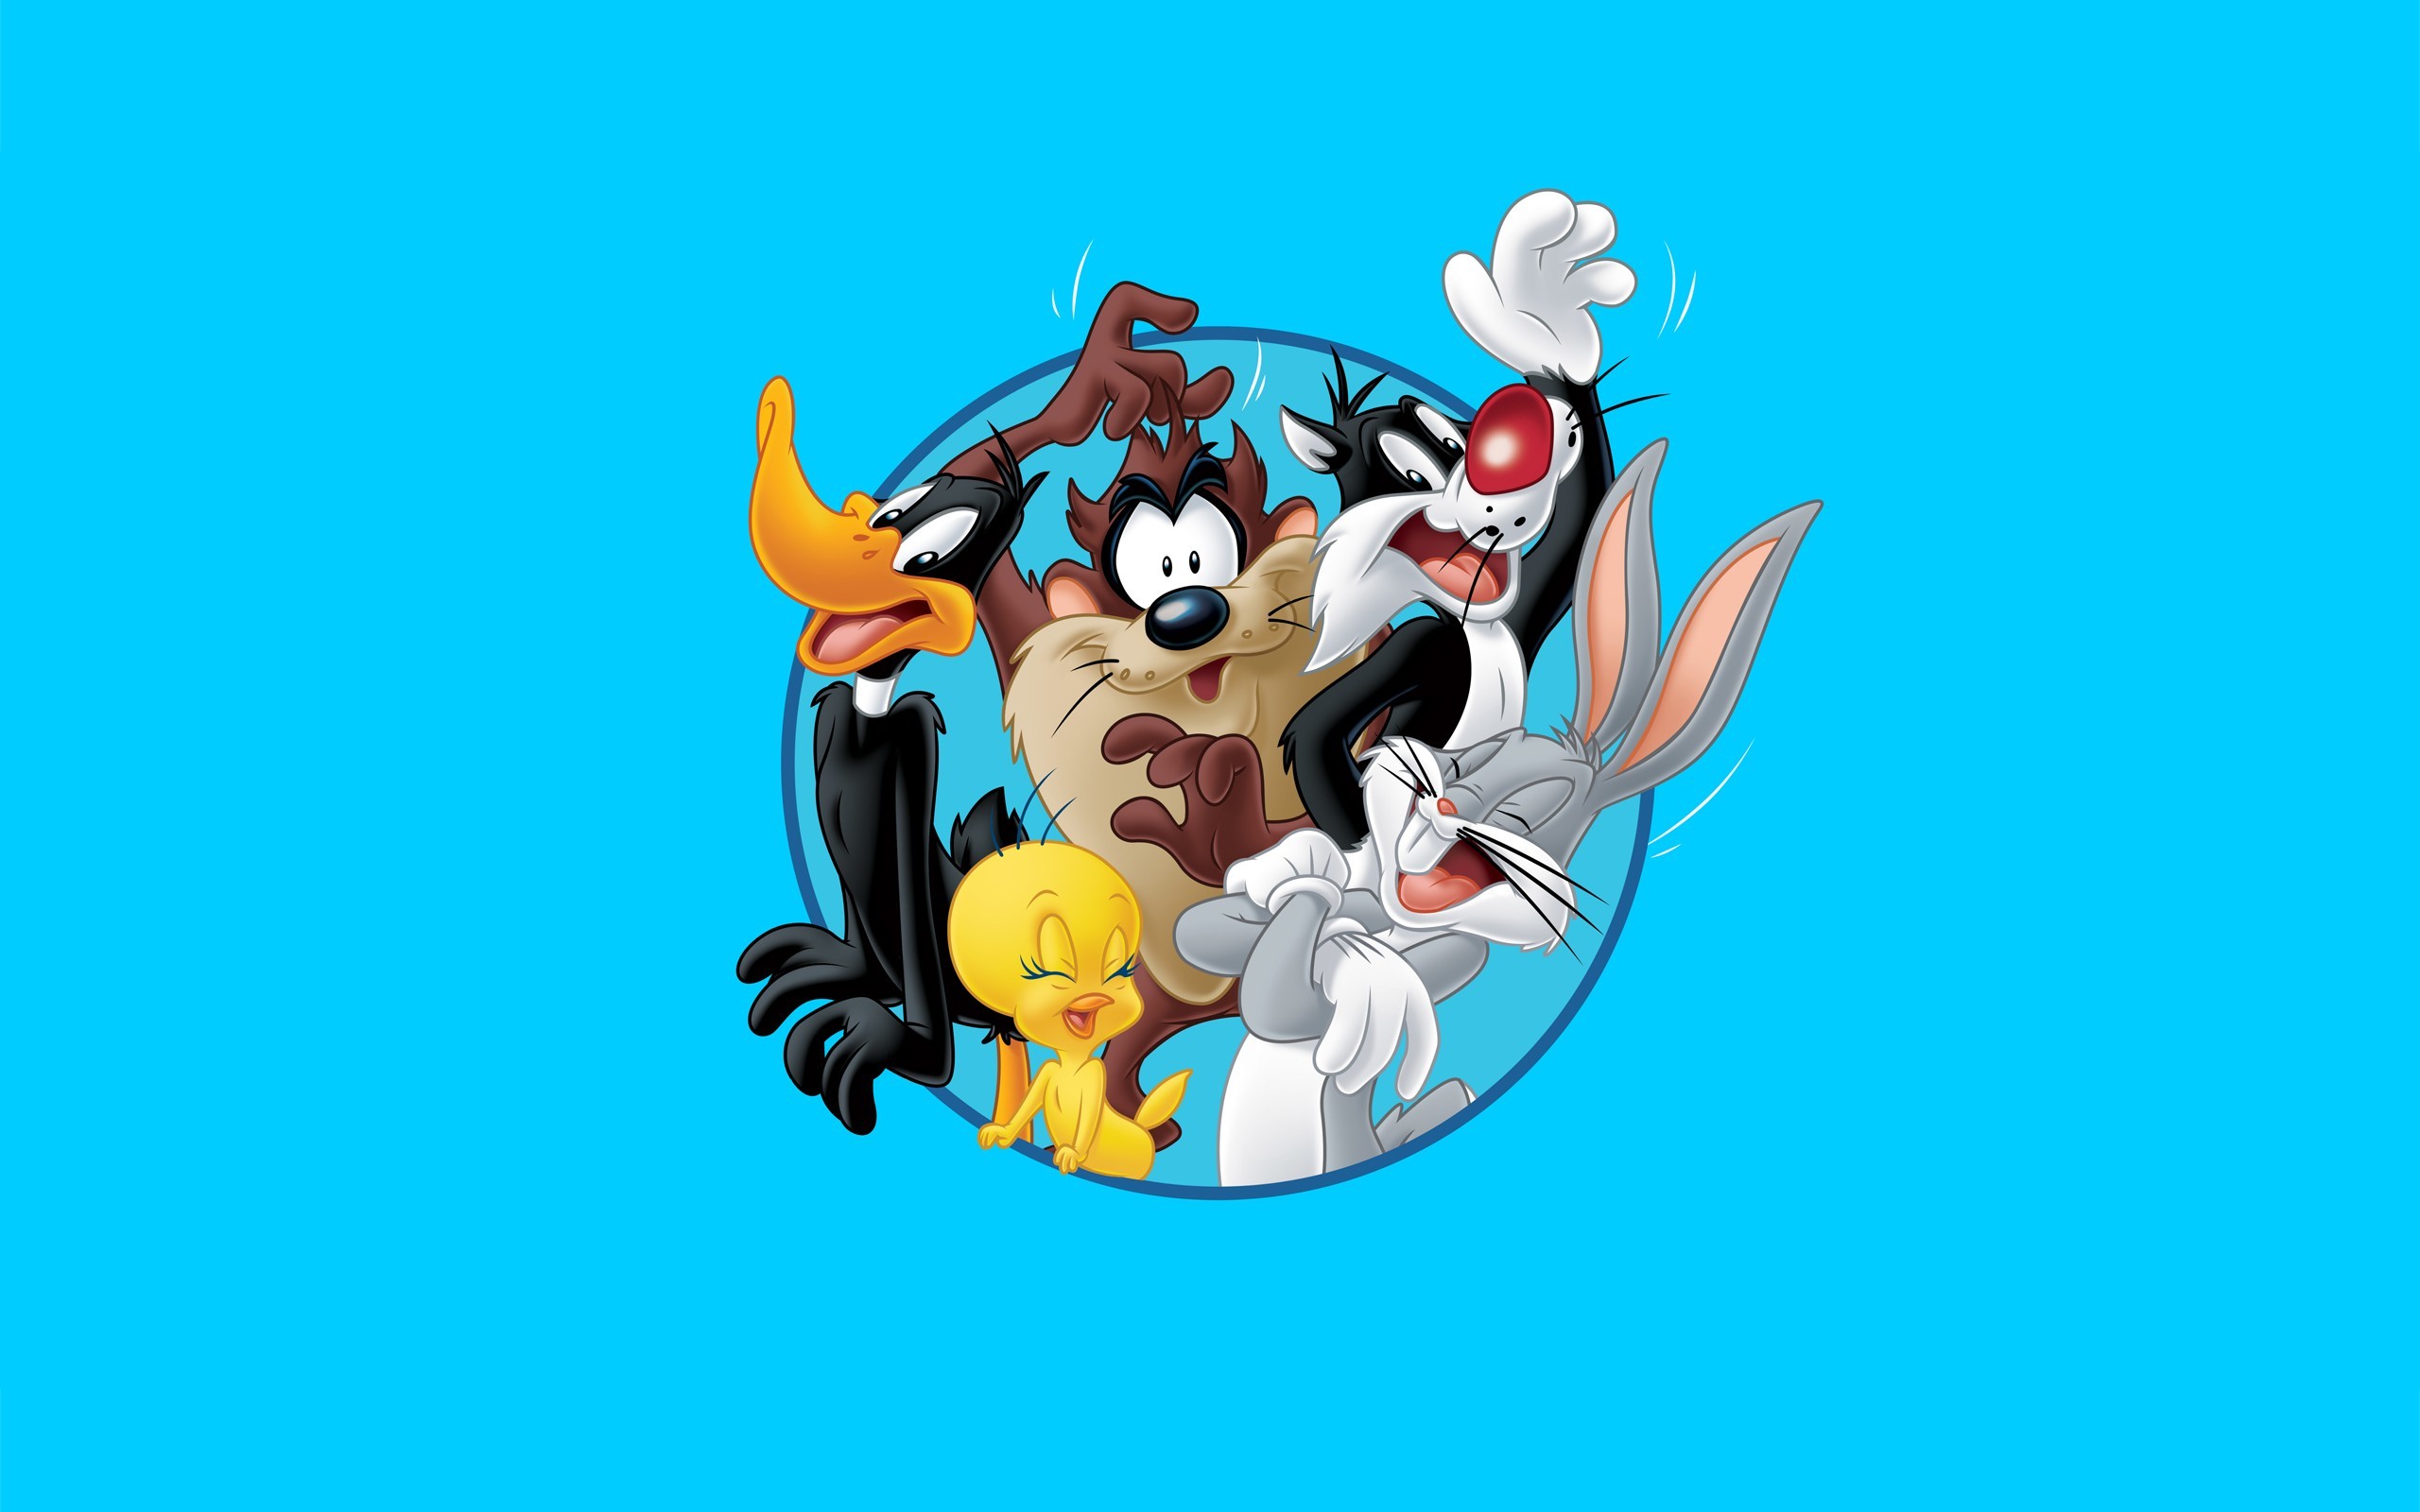 2560x1600 Ewallpaper Hub brings Looney Tunes wallpaper in high resolution for you. We  collect premium quality Looney Tunes wallpapers HD from all over the  internet ...